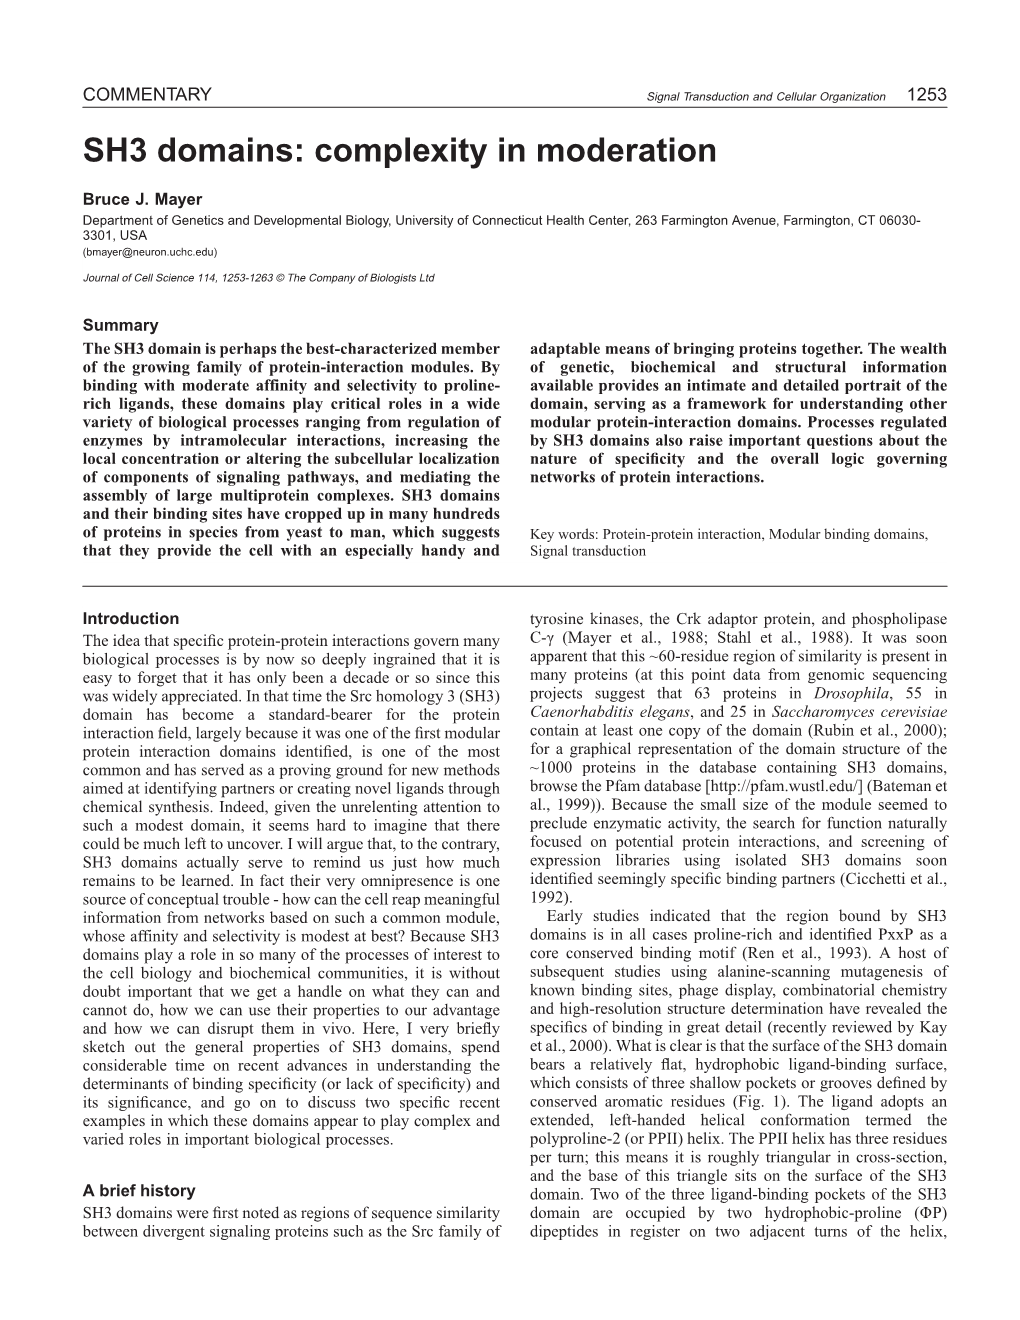 SH3 Domains: Complexity in Moderation